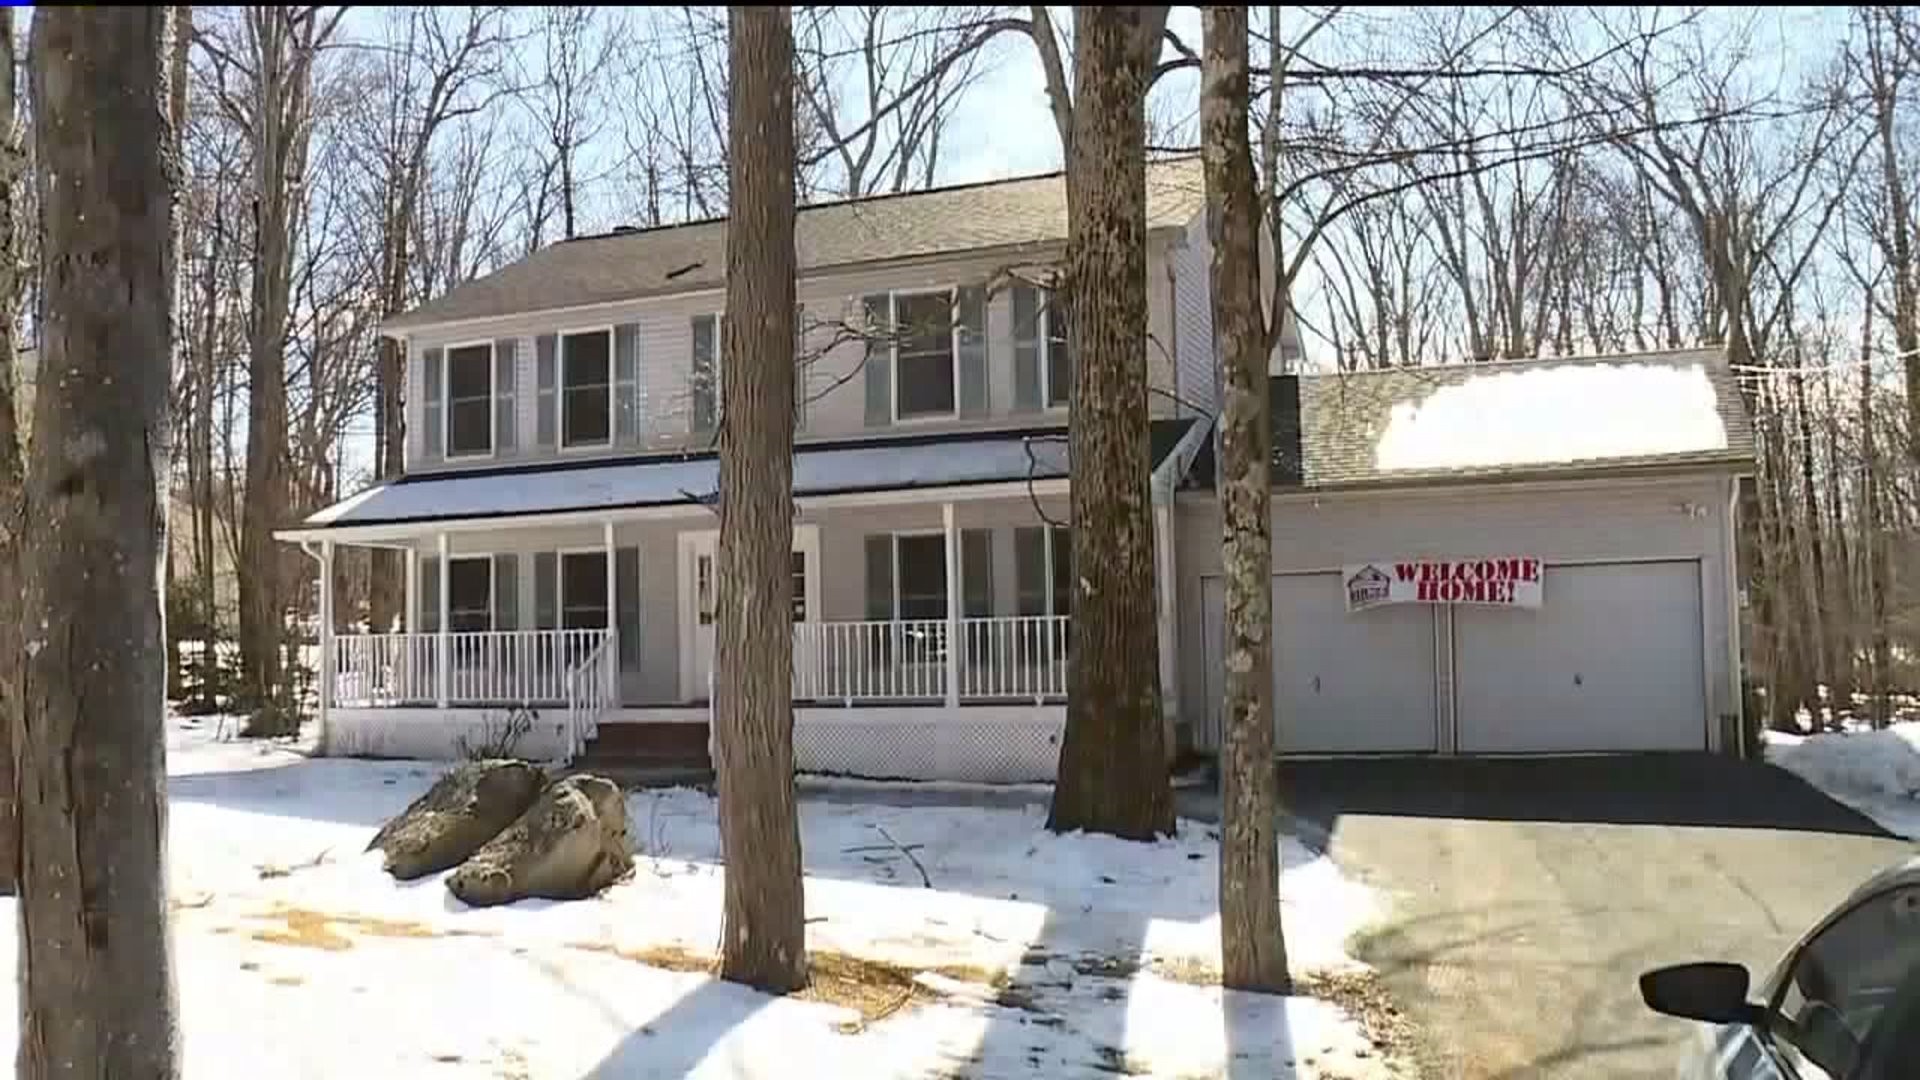 Retired Army Veteran Gets New Home in the Poconos